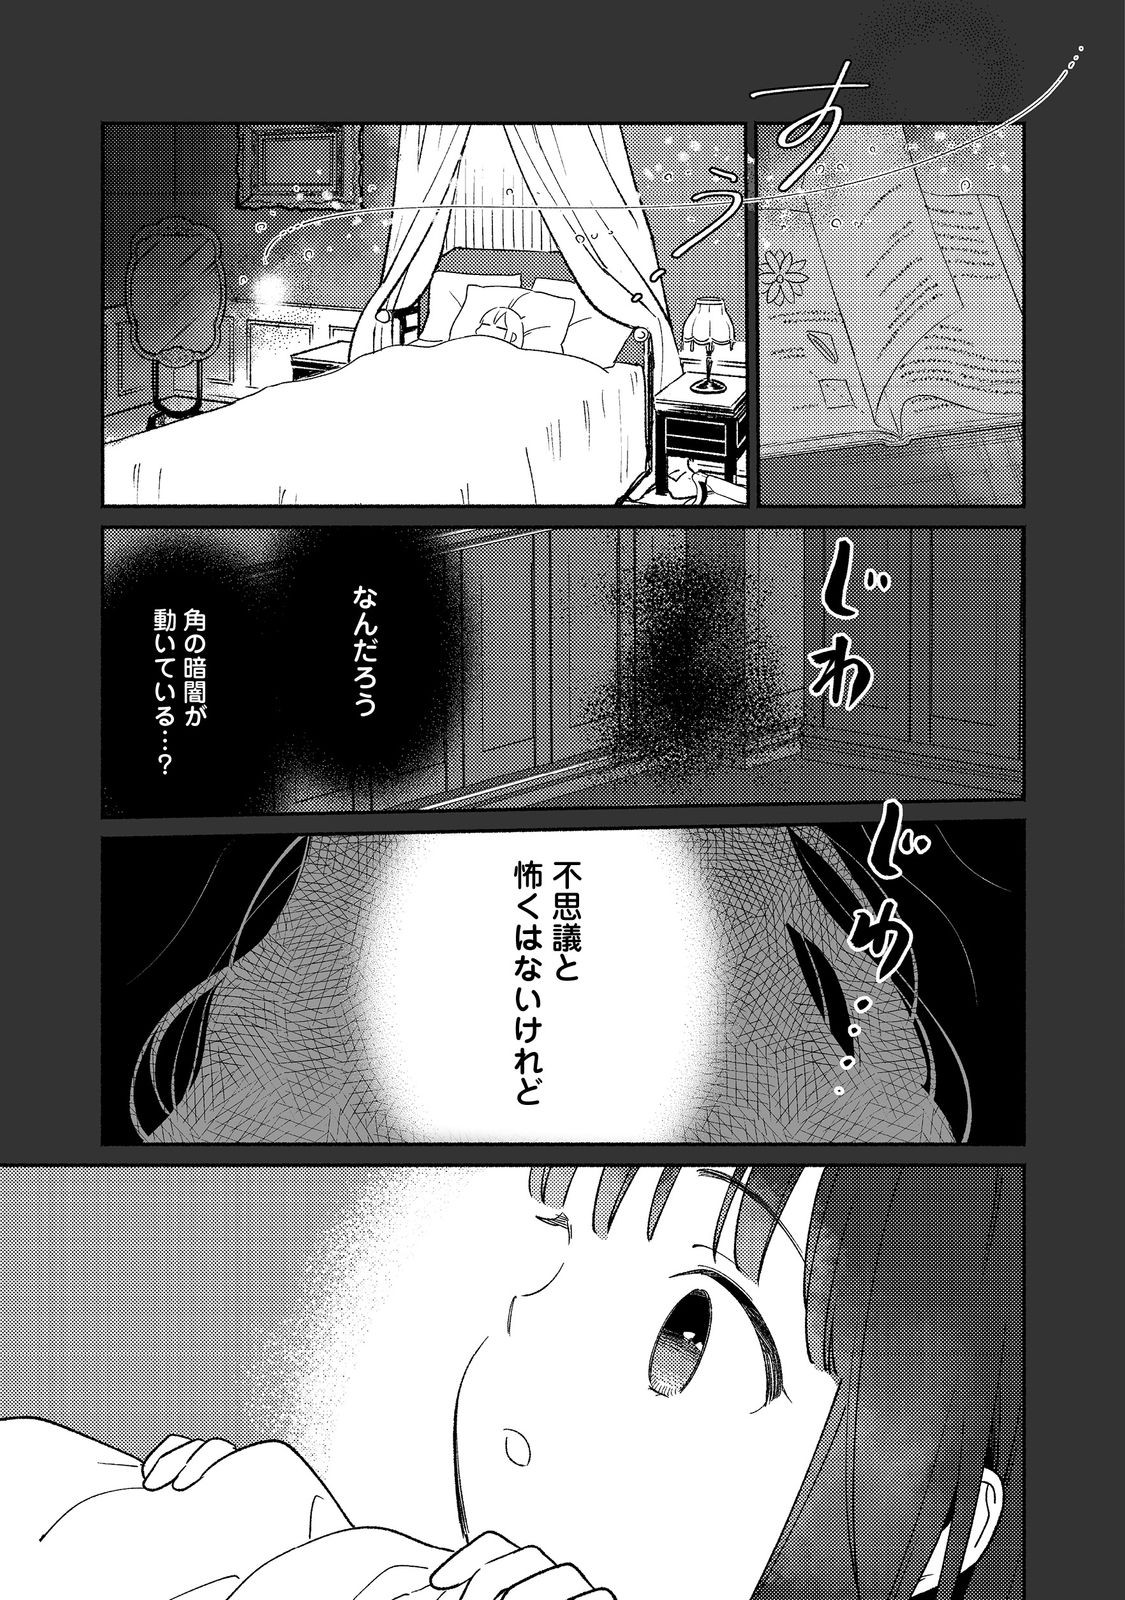 I’m the White Pig Nobleman 第22.1話 - Page 3